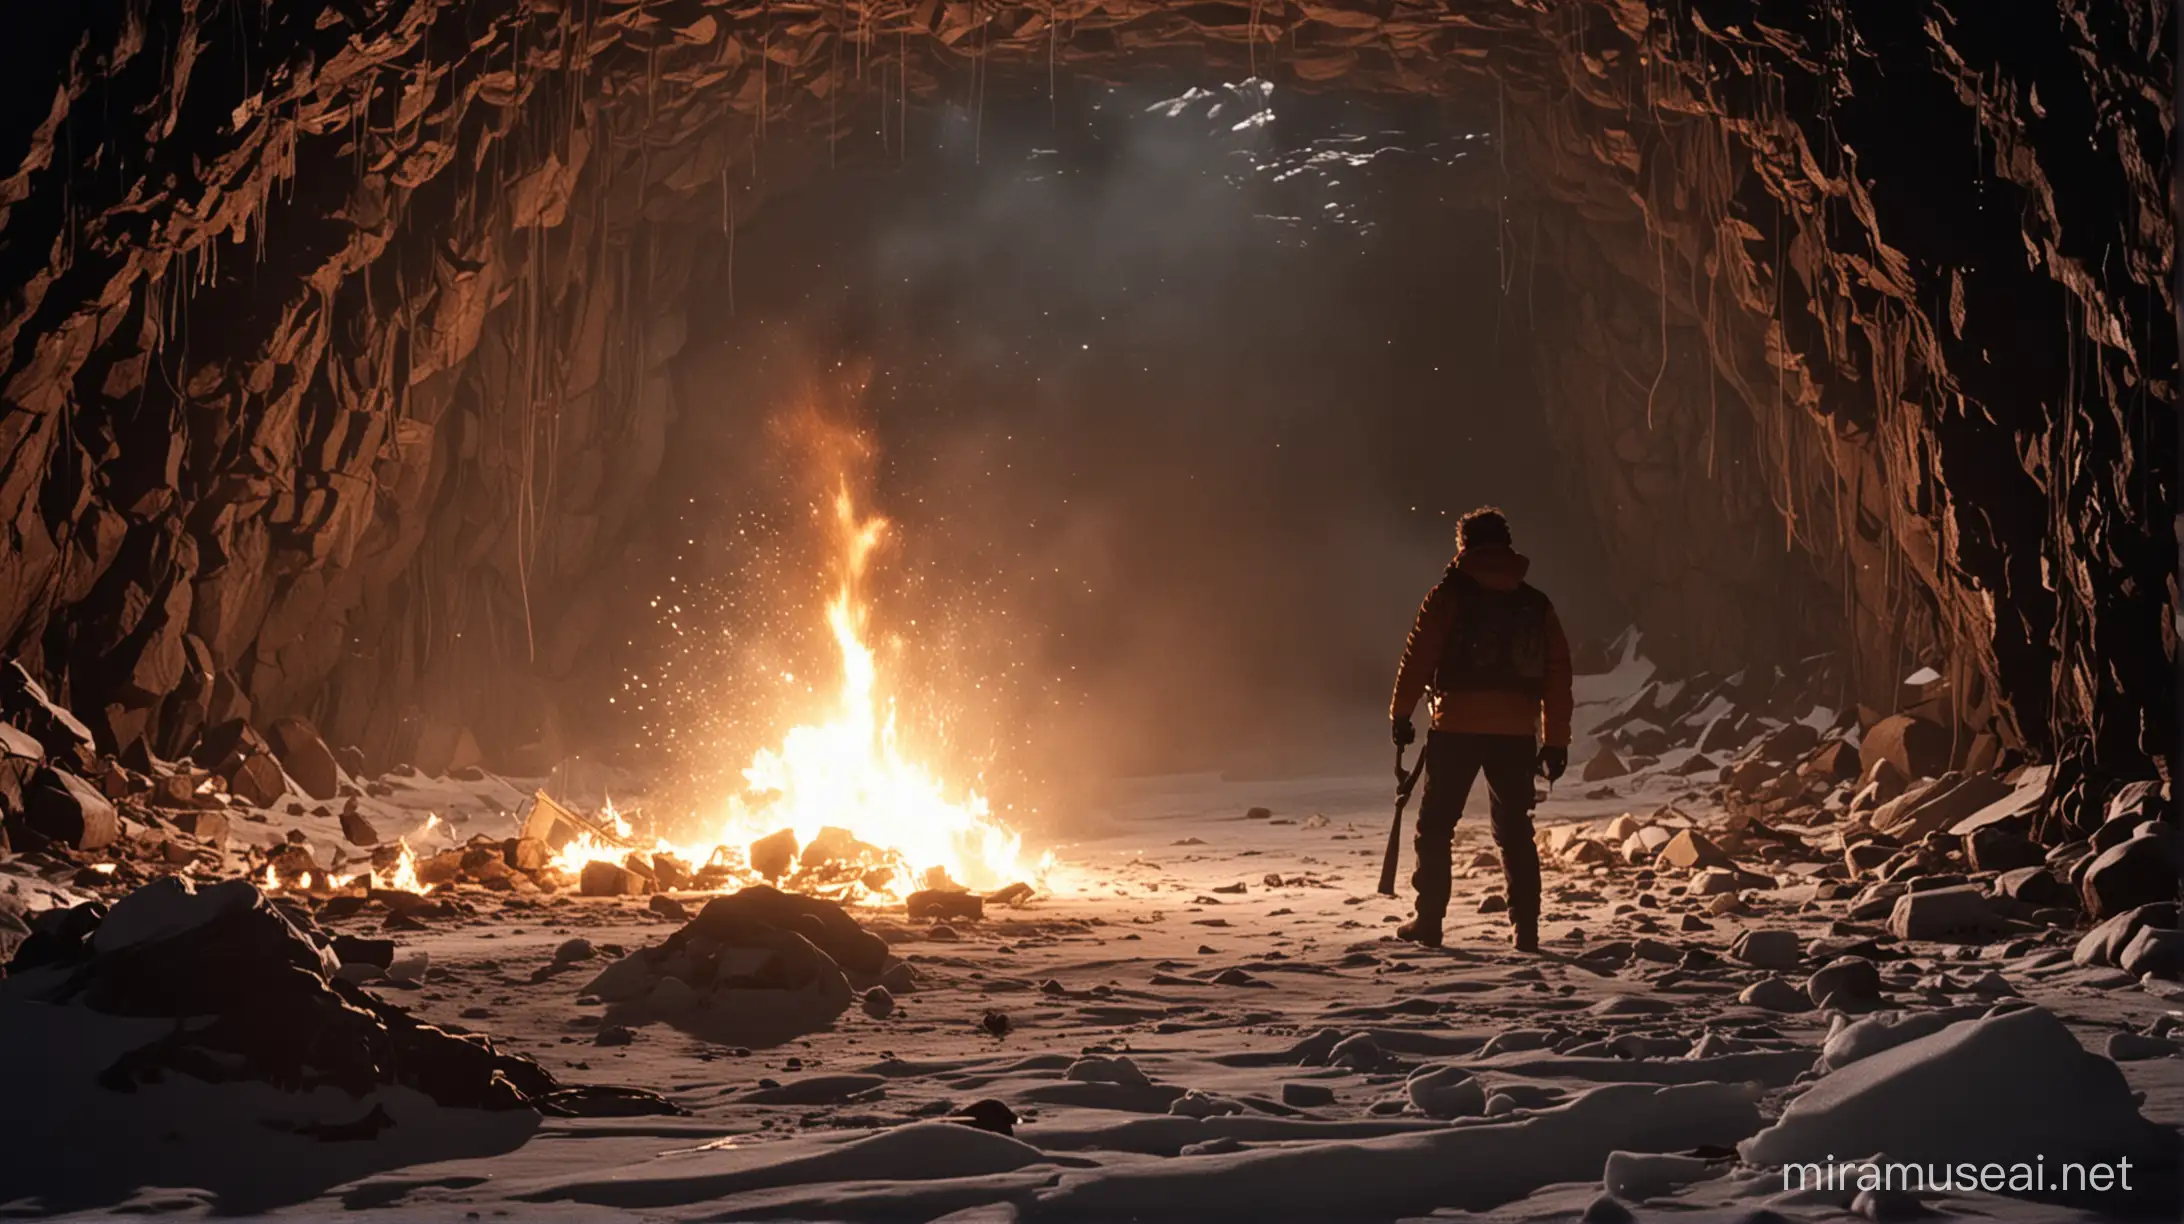 cinematic still, film by john carpenter, the thing, antarctica, dark cavern, kurst russell throwing dynamite, back towards camera, flames, wreckage of machinery